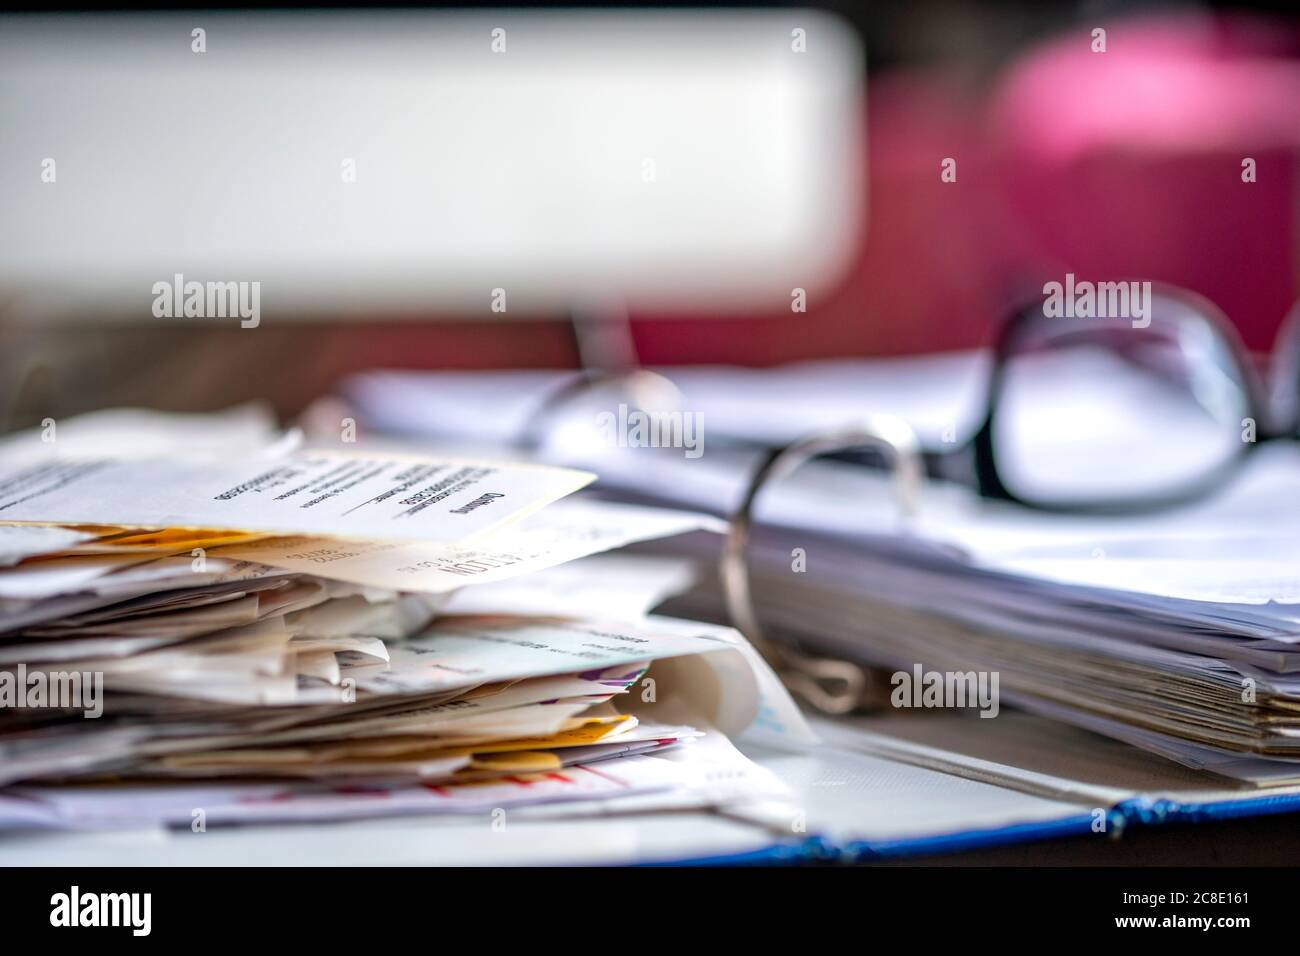 Binder with various receipts and documents Stock Photo